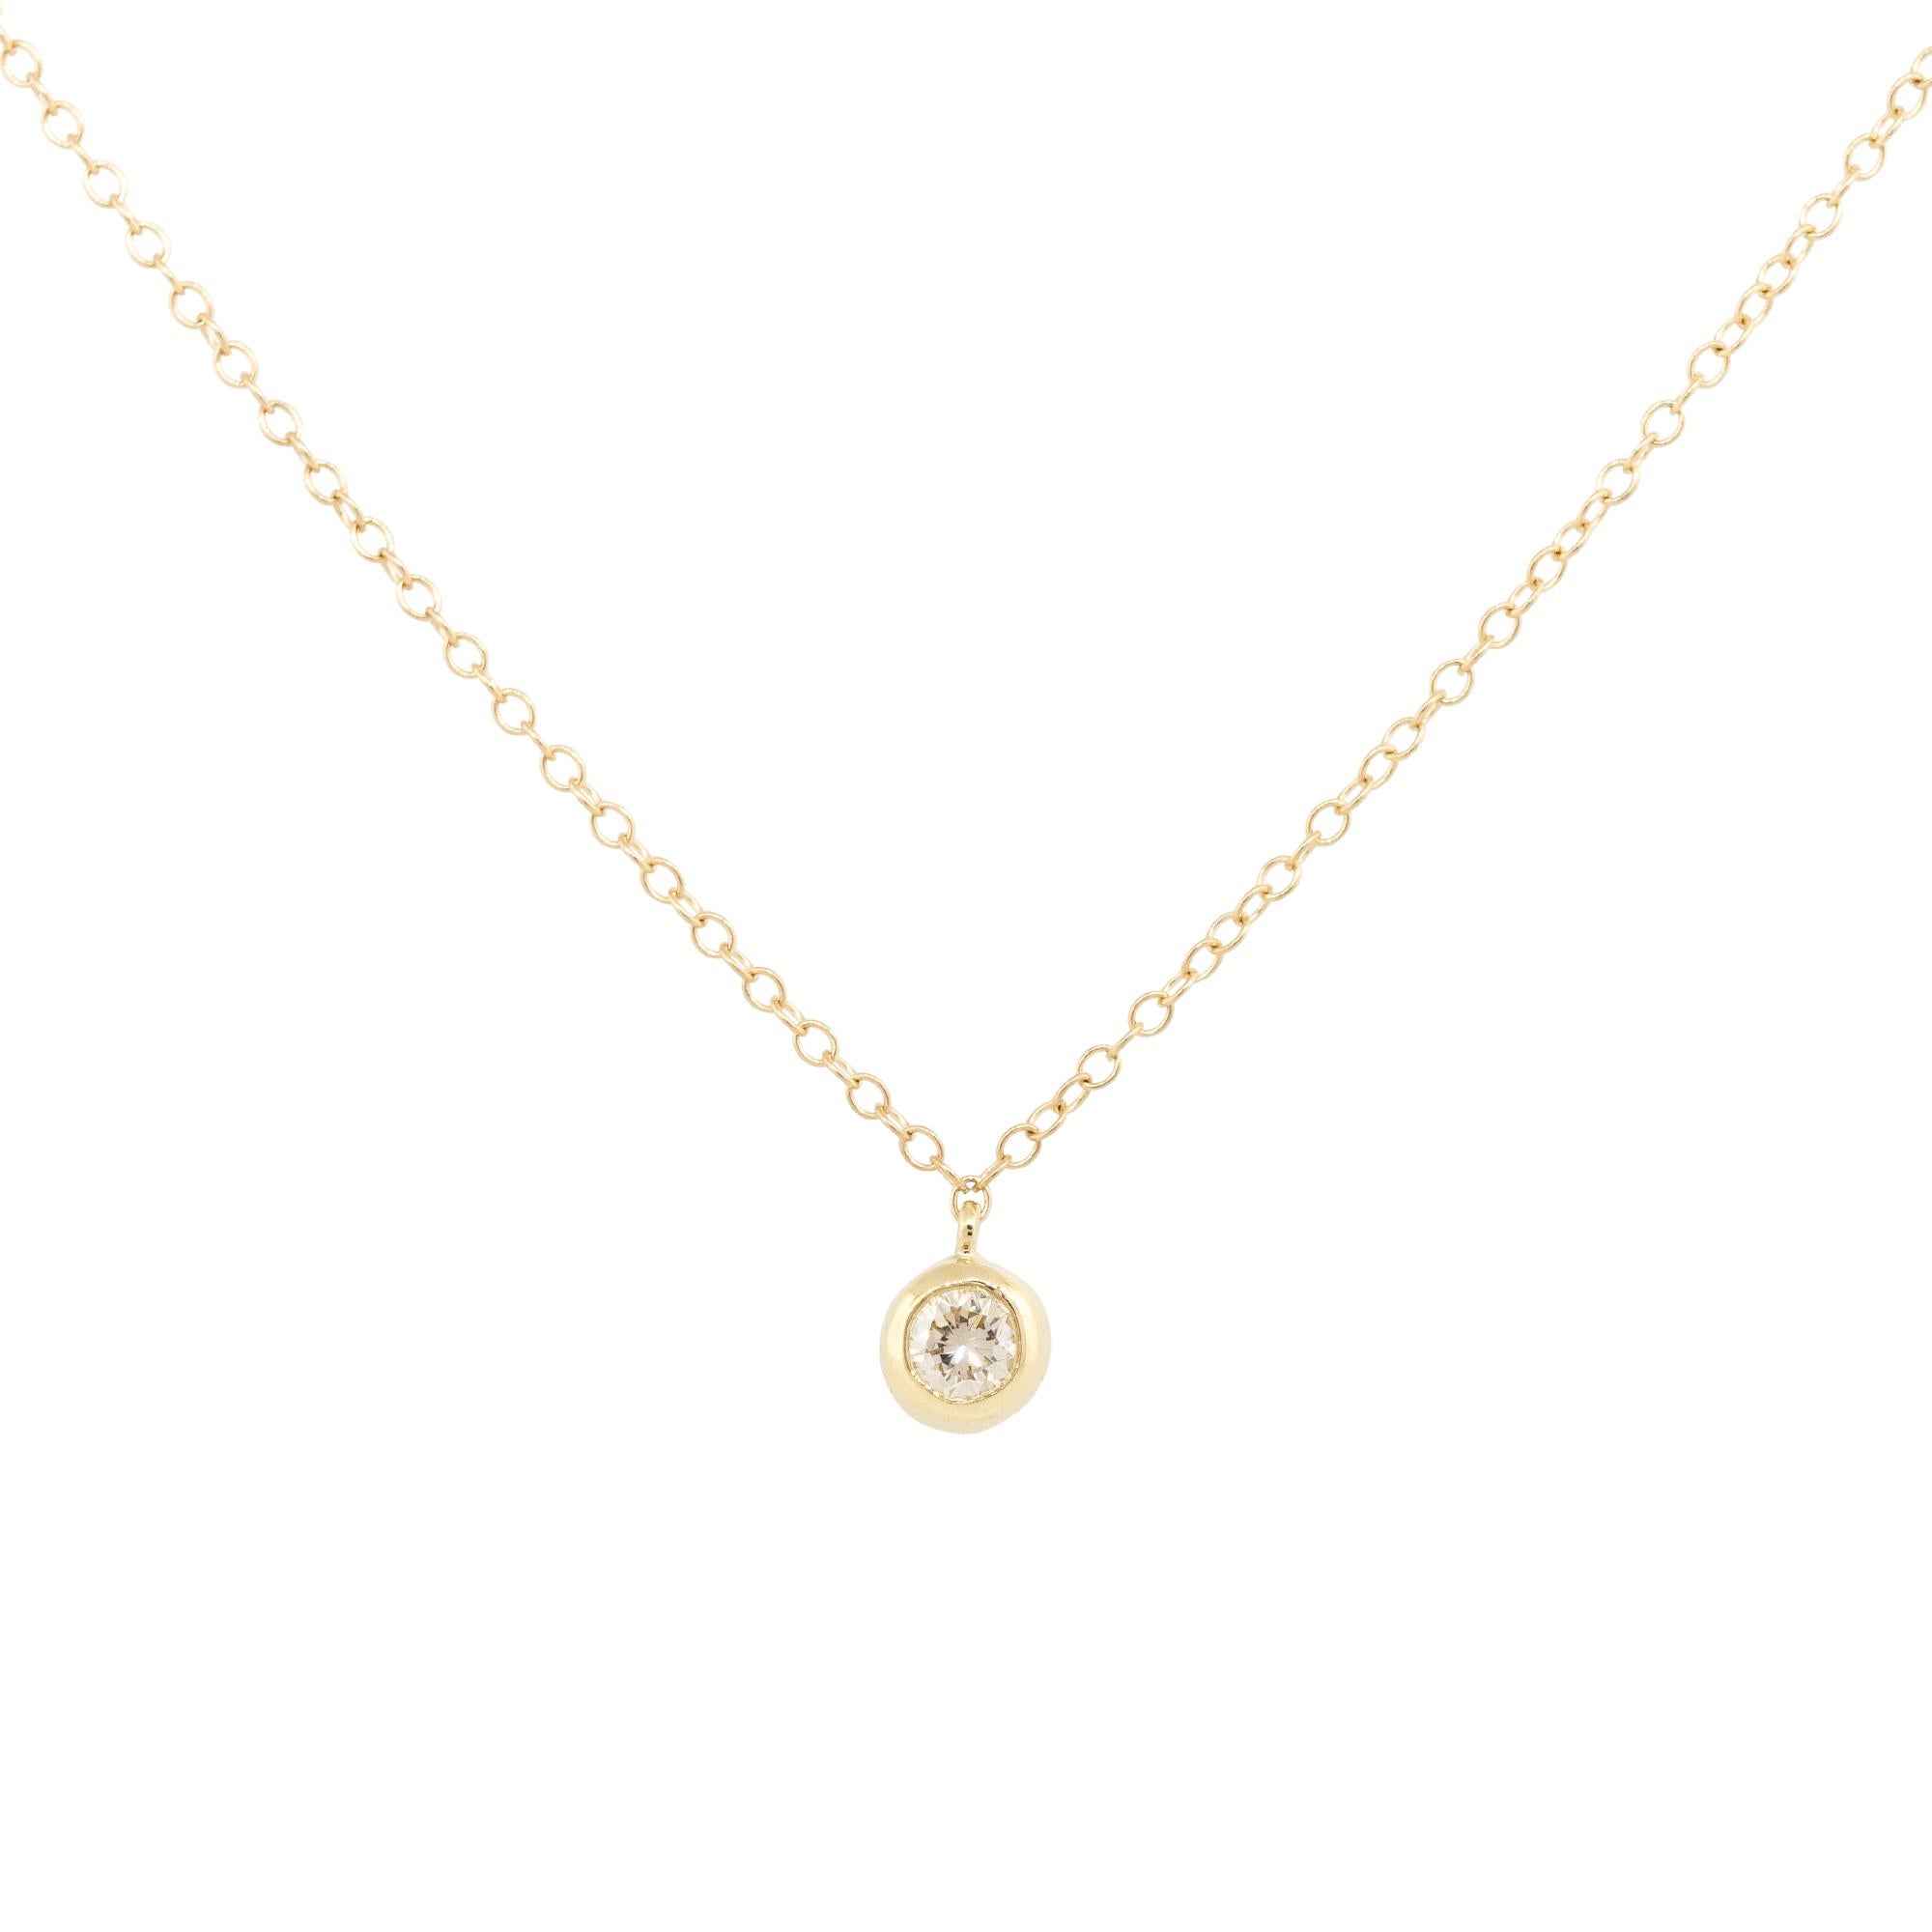 This 14 Karat Diamond Station Necklace is the perfect addition for your jewelry collection! This necklace can be worn with other items of jewelry, or it can stand by itself, which makes this a very versatile piece to own. Another important factor to